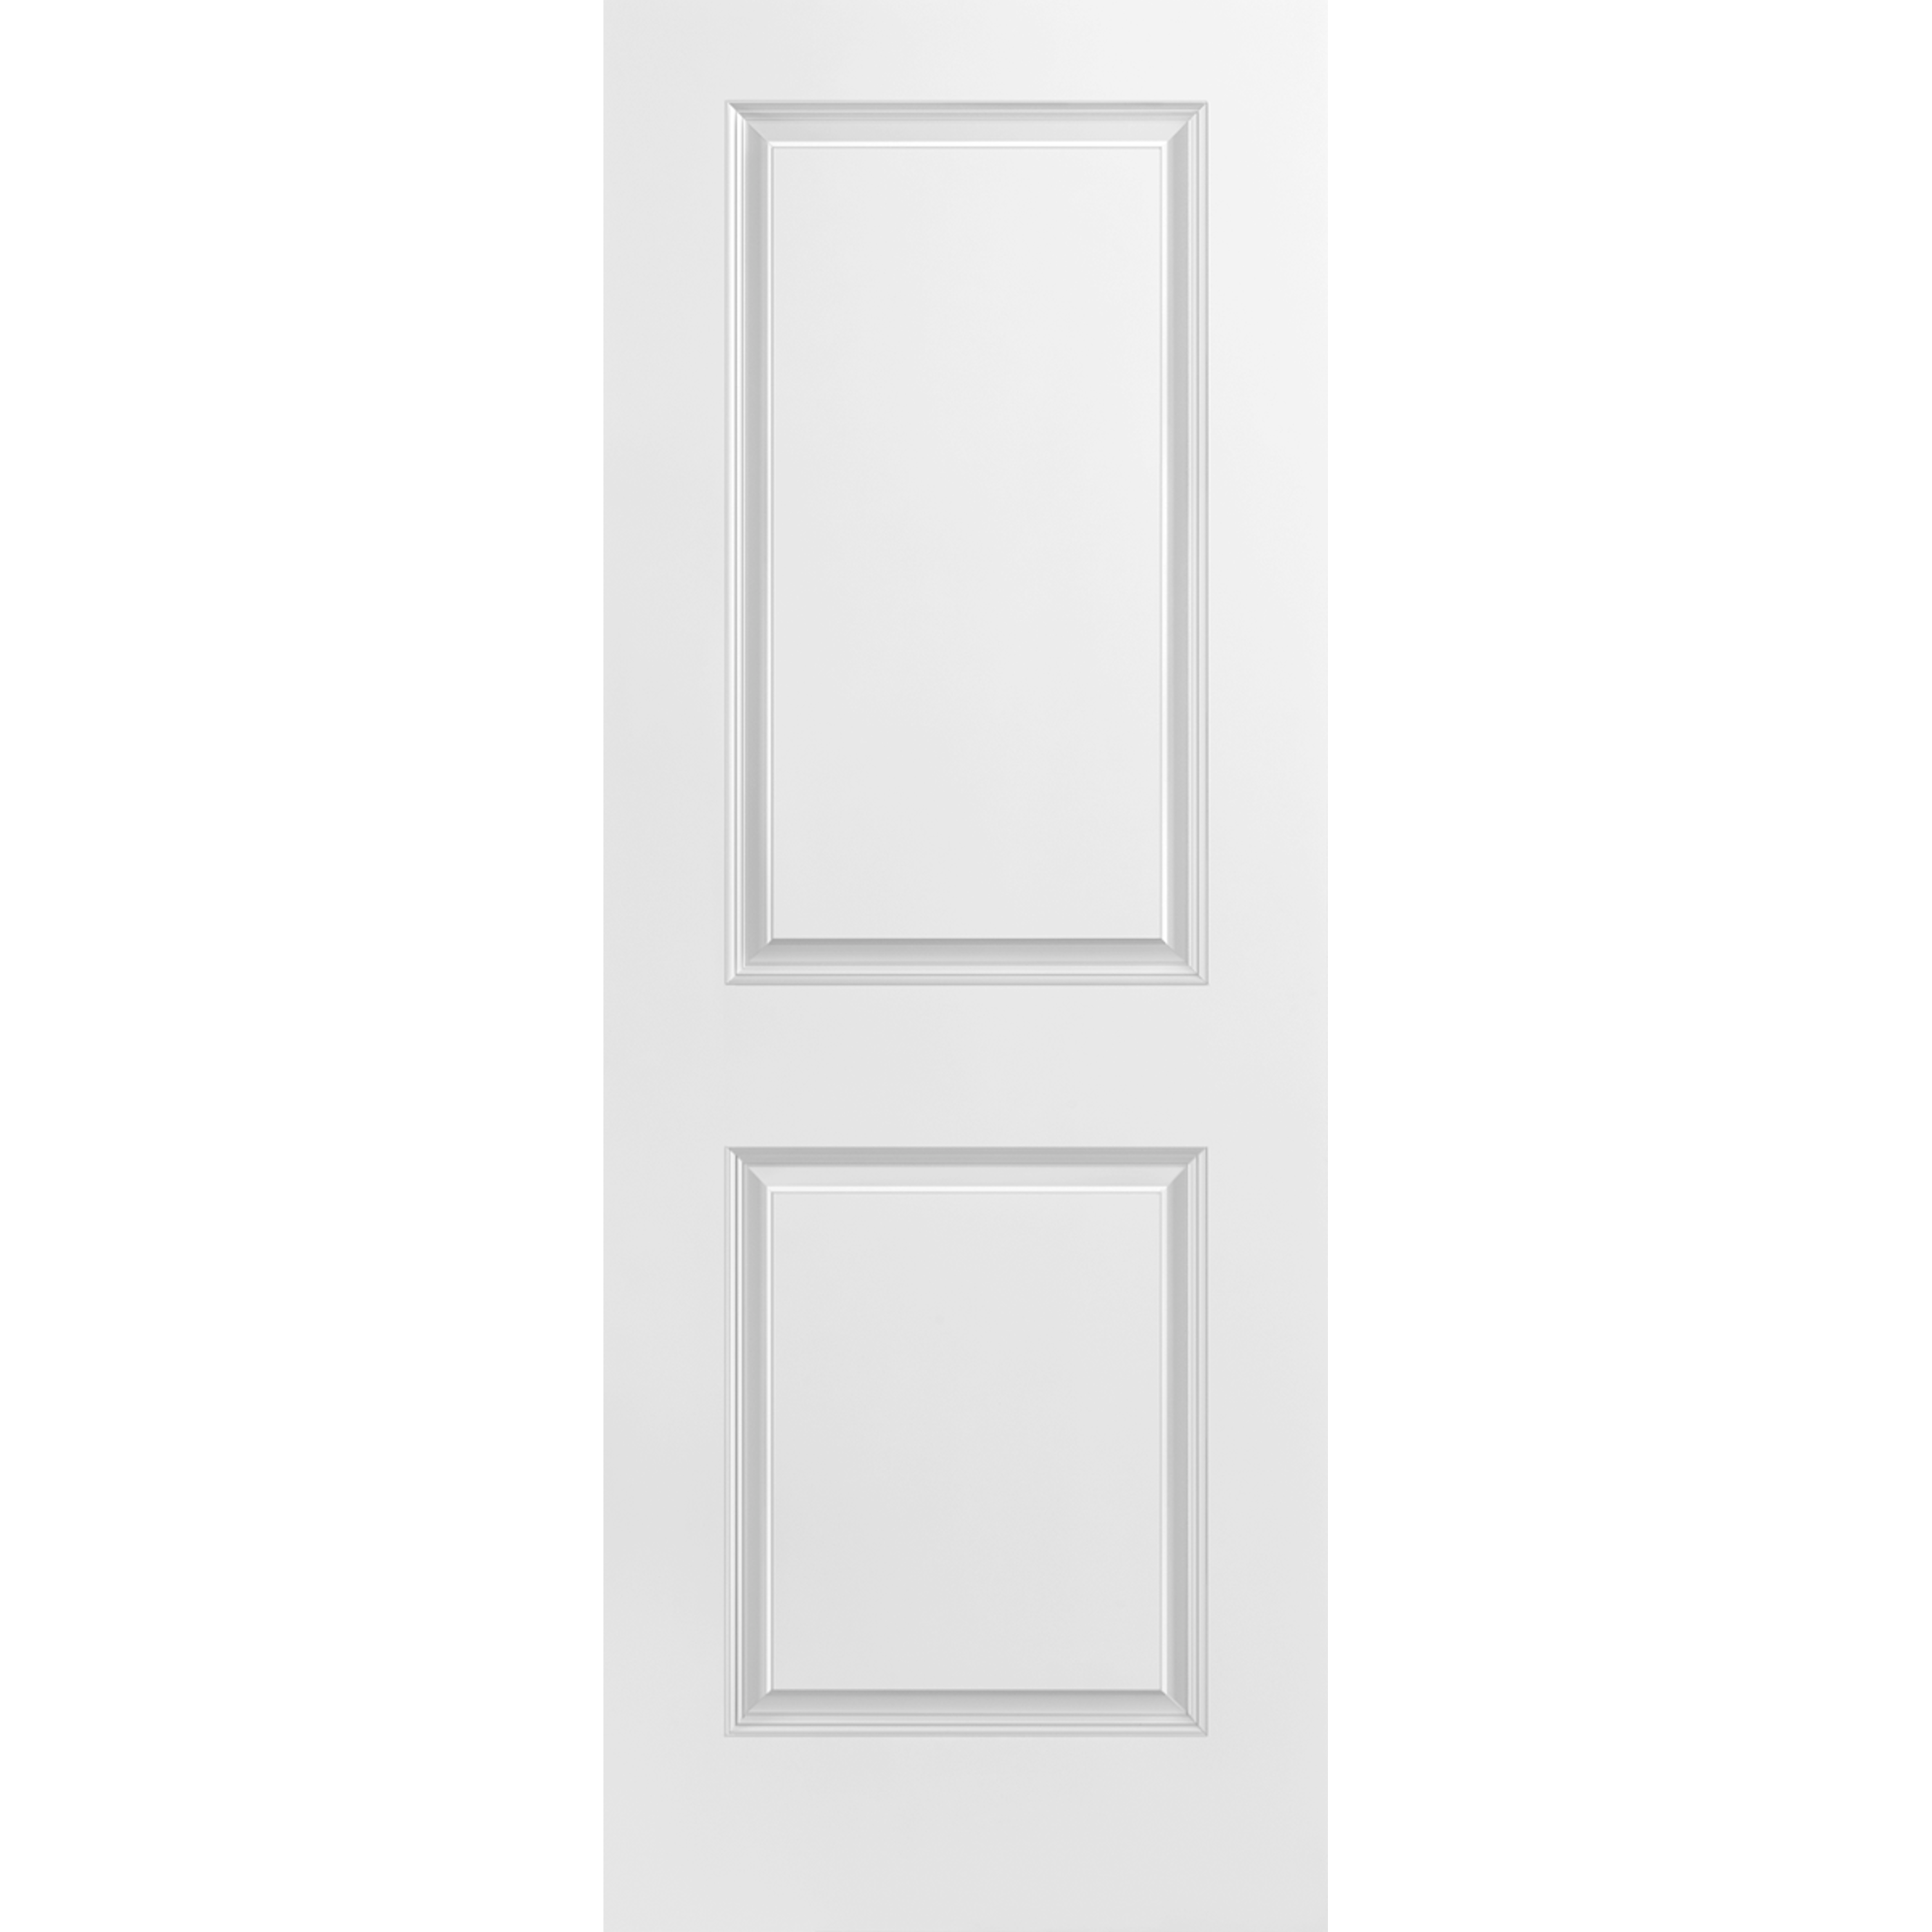 24x80 2 Panel Square Smooth Moulded Fast Fit Door with 4-5/8" Primed Finger Joint Jamb